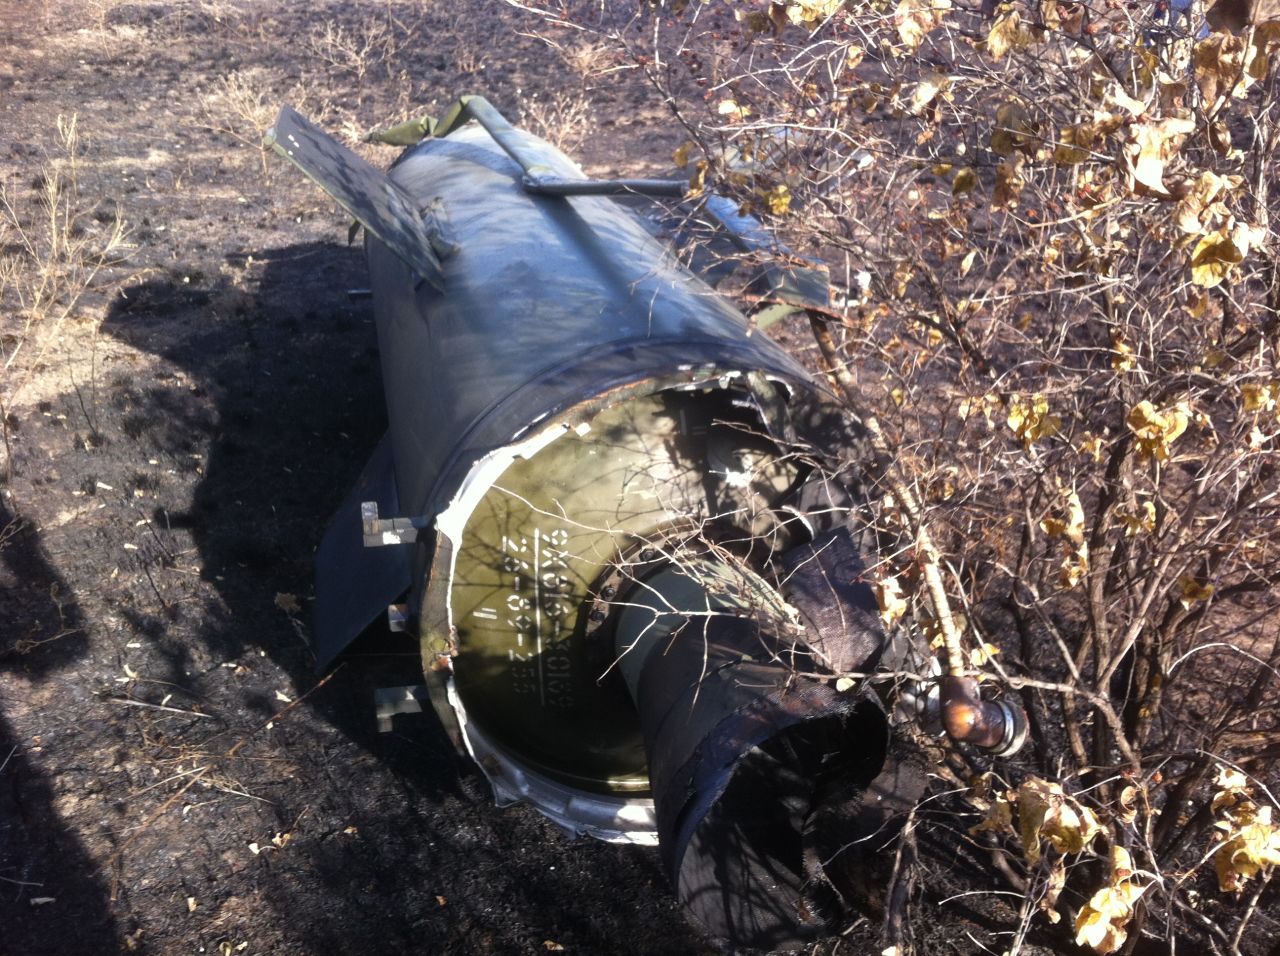 The rocket motor section of a Russian-made SS-21 'Scarab' ballistic missile, found by the CNN team in a field south of Ilovaisk.